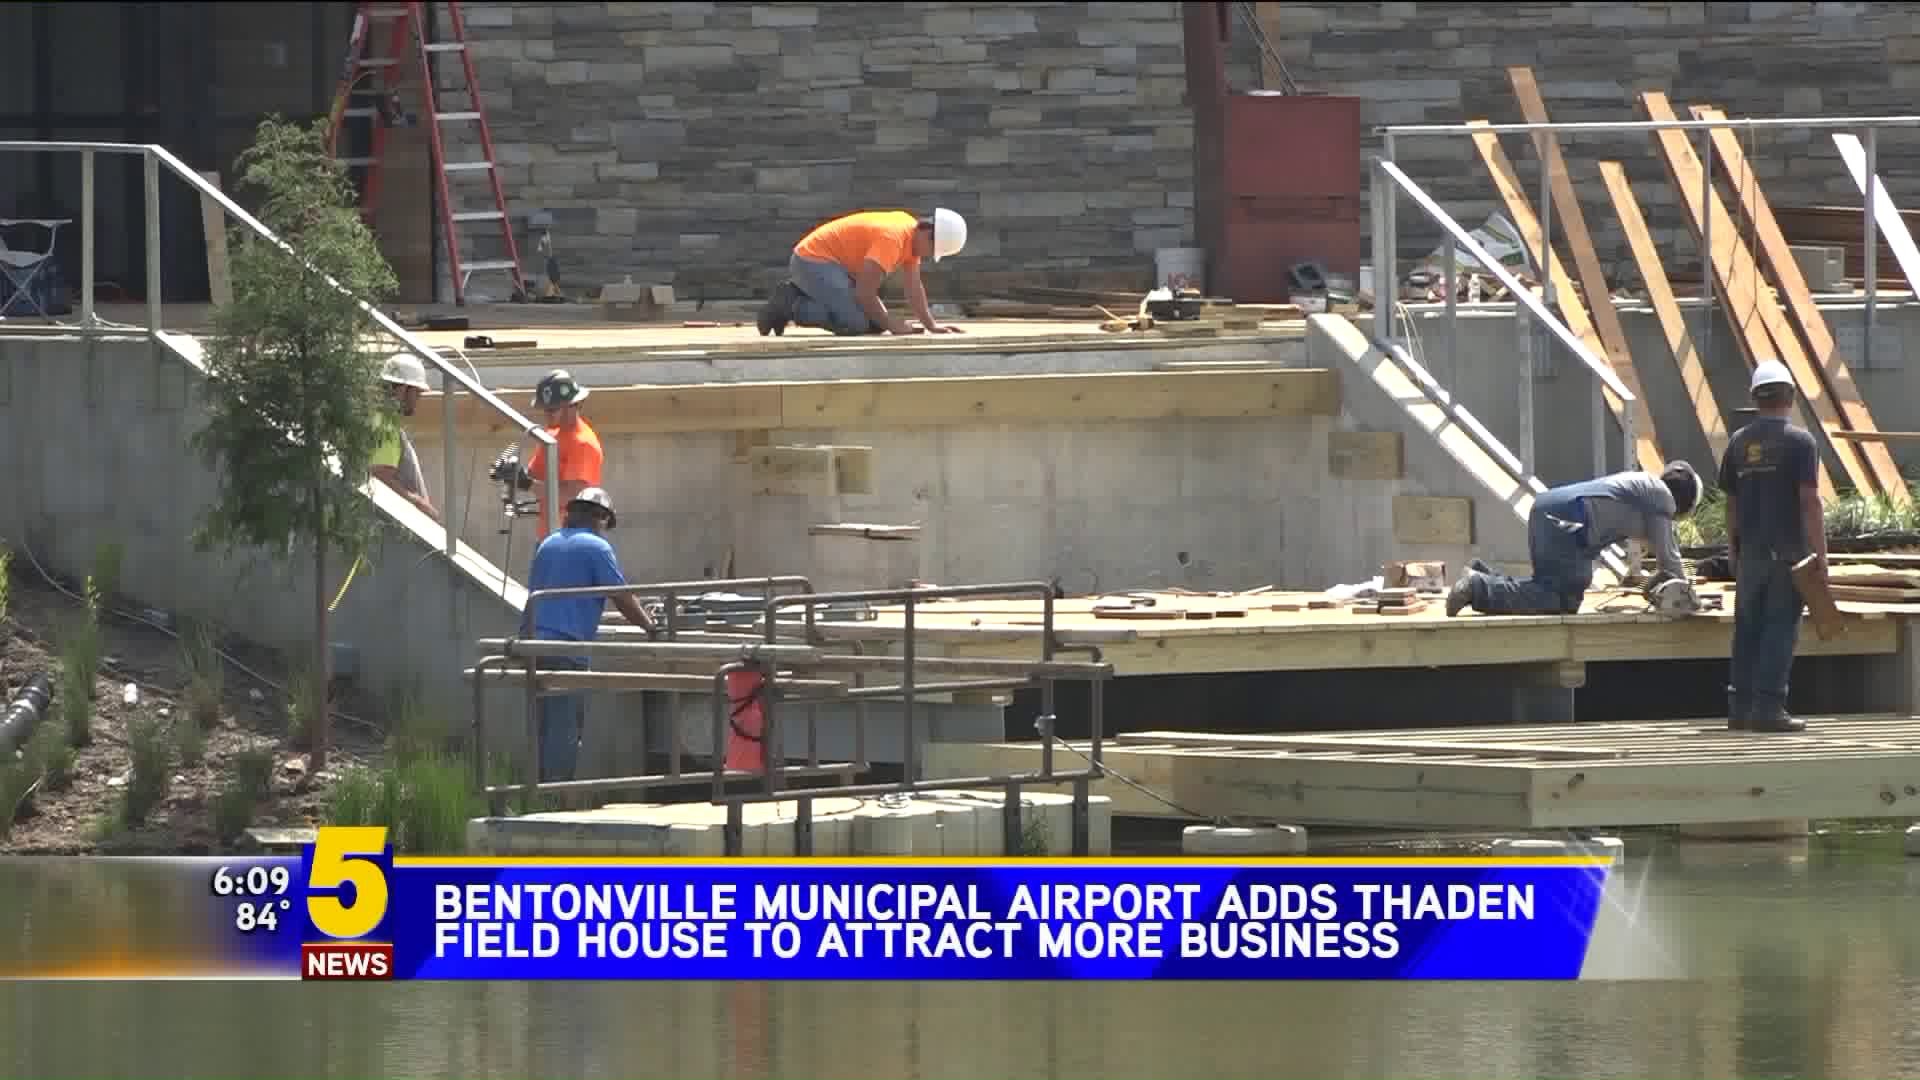 Bentonville Municipal Airport Looking To Attract More Business Through Upgrades